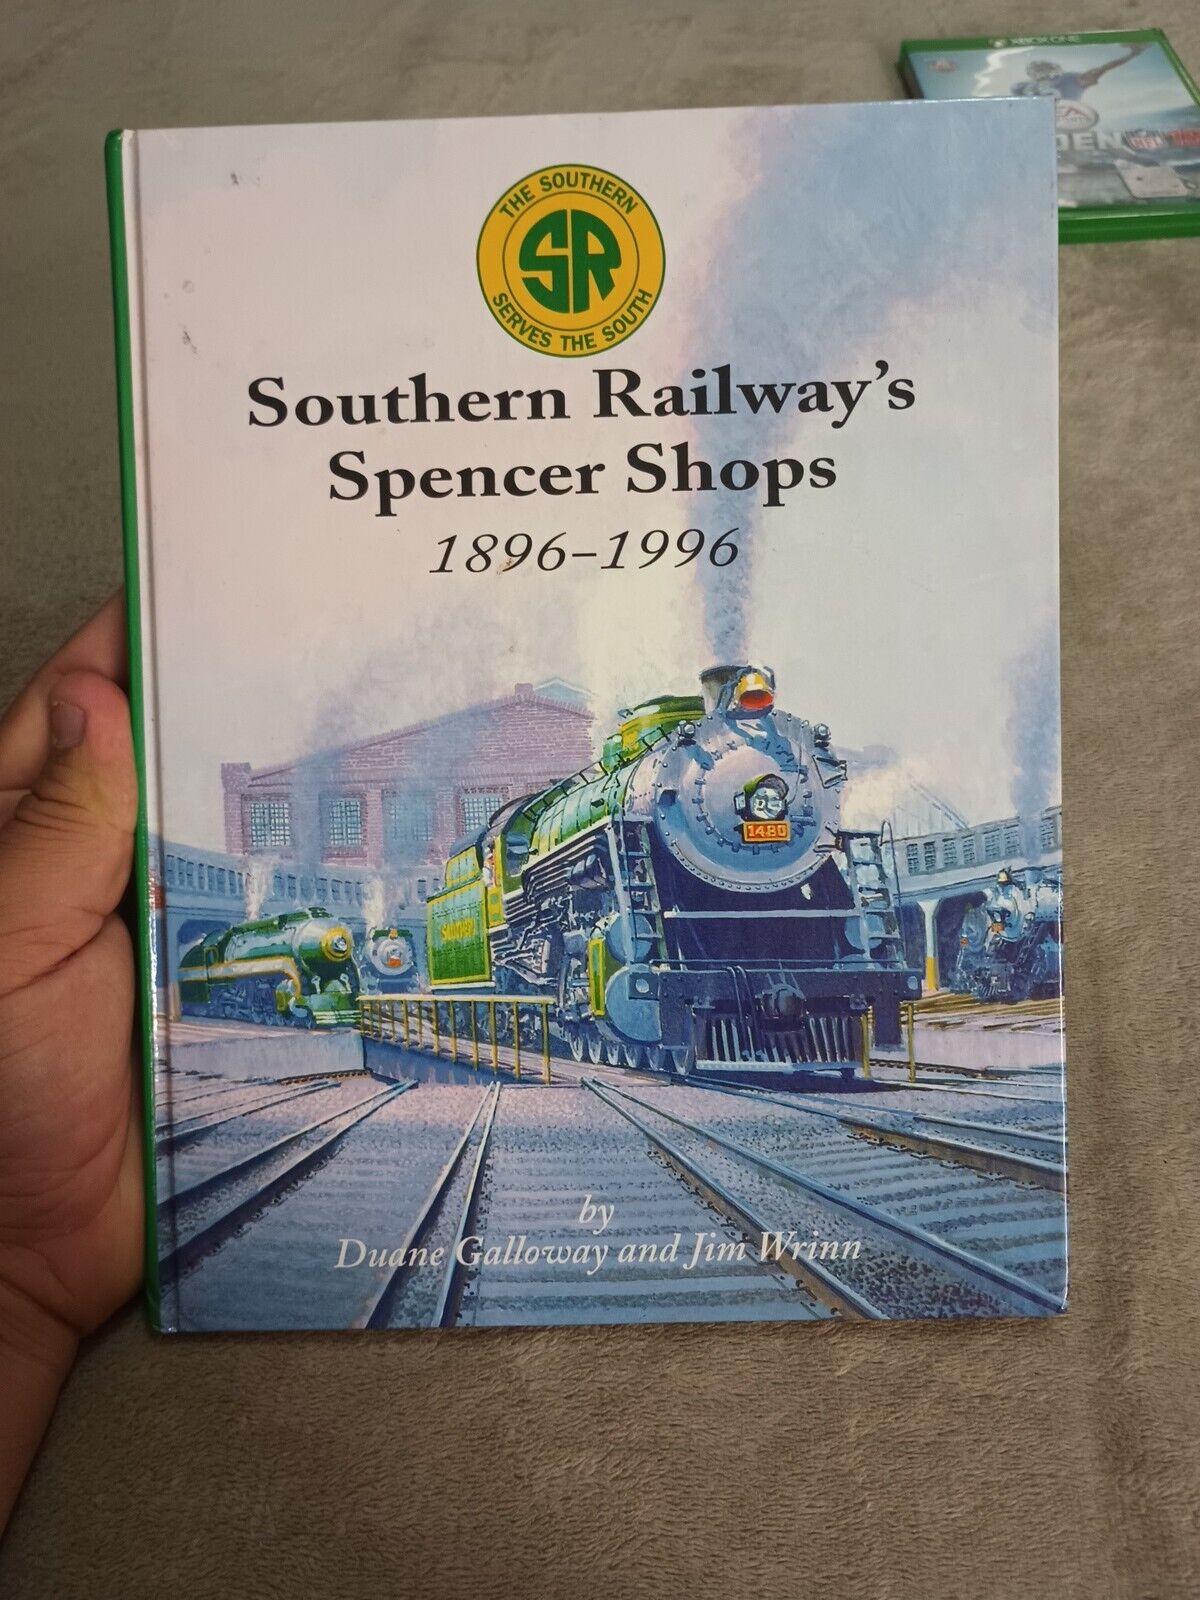 Southern Railway's Spencer Shops, 1896-1996 by Jim Galloway (1998, Hardcover)